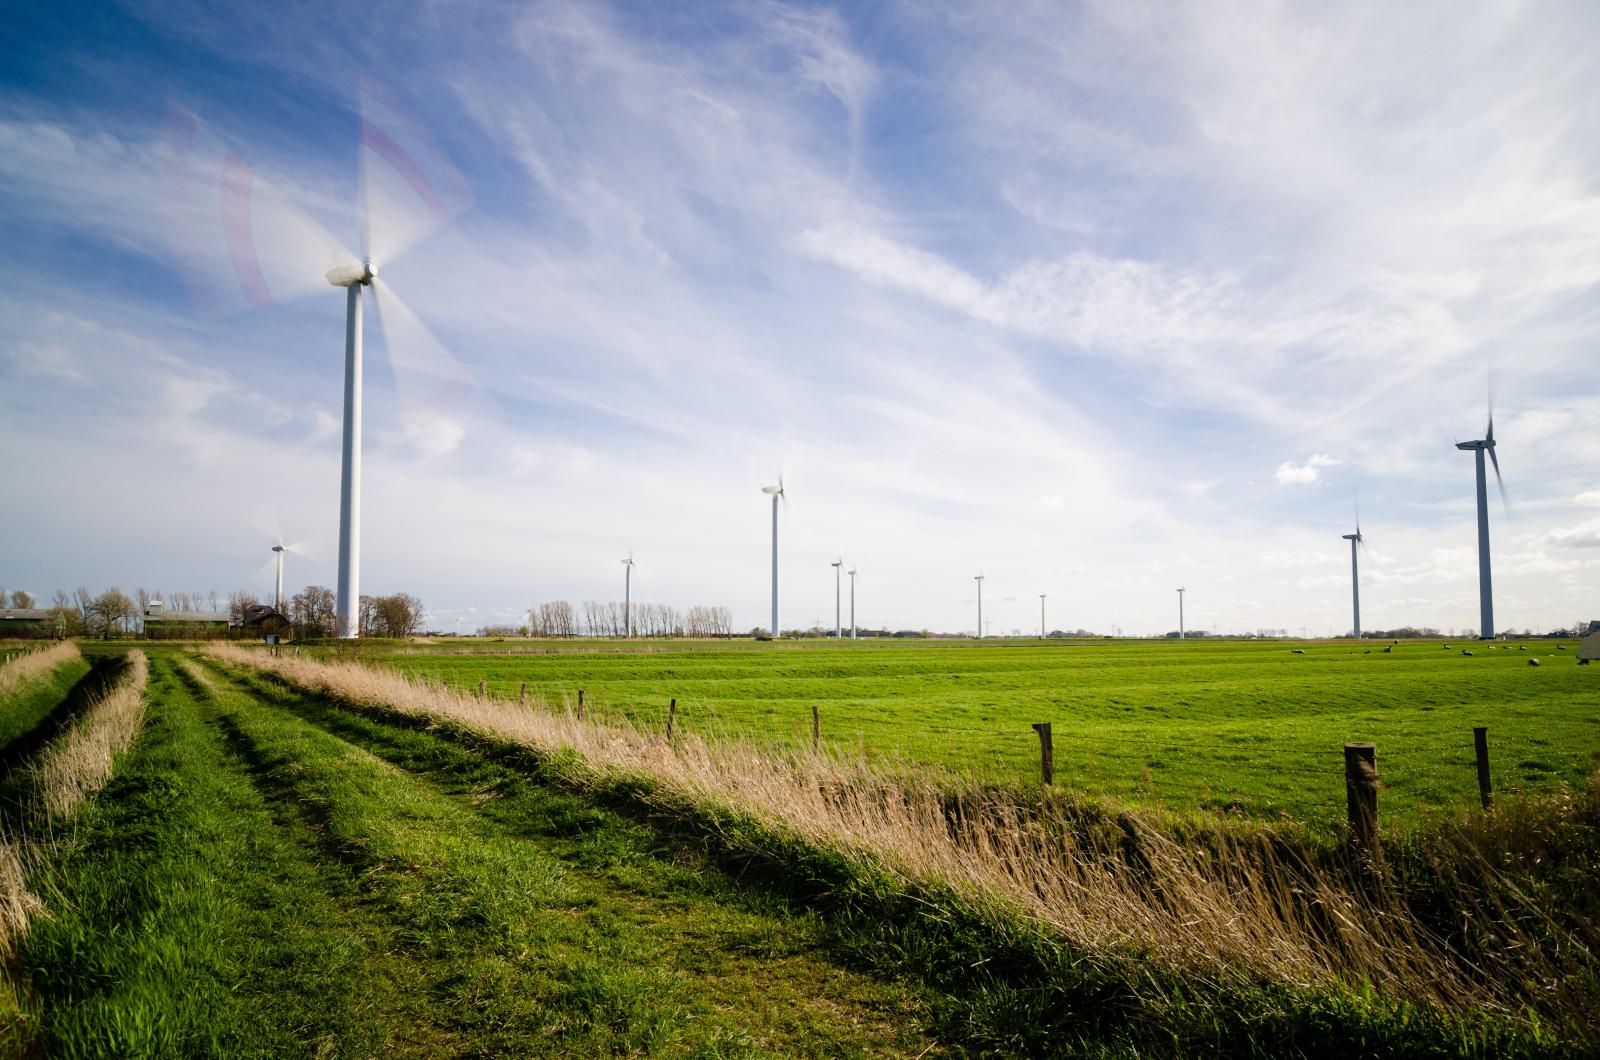 Wind turbines in the countryside. Photo credit: Pexels